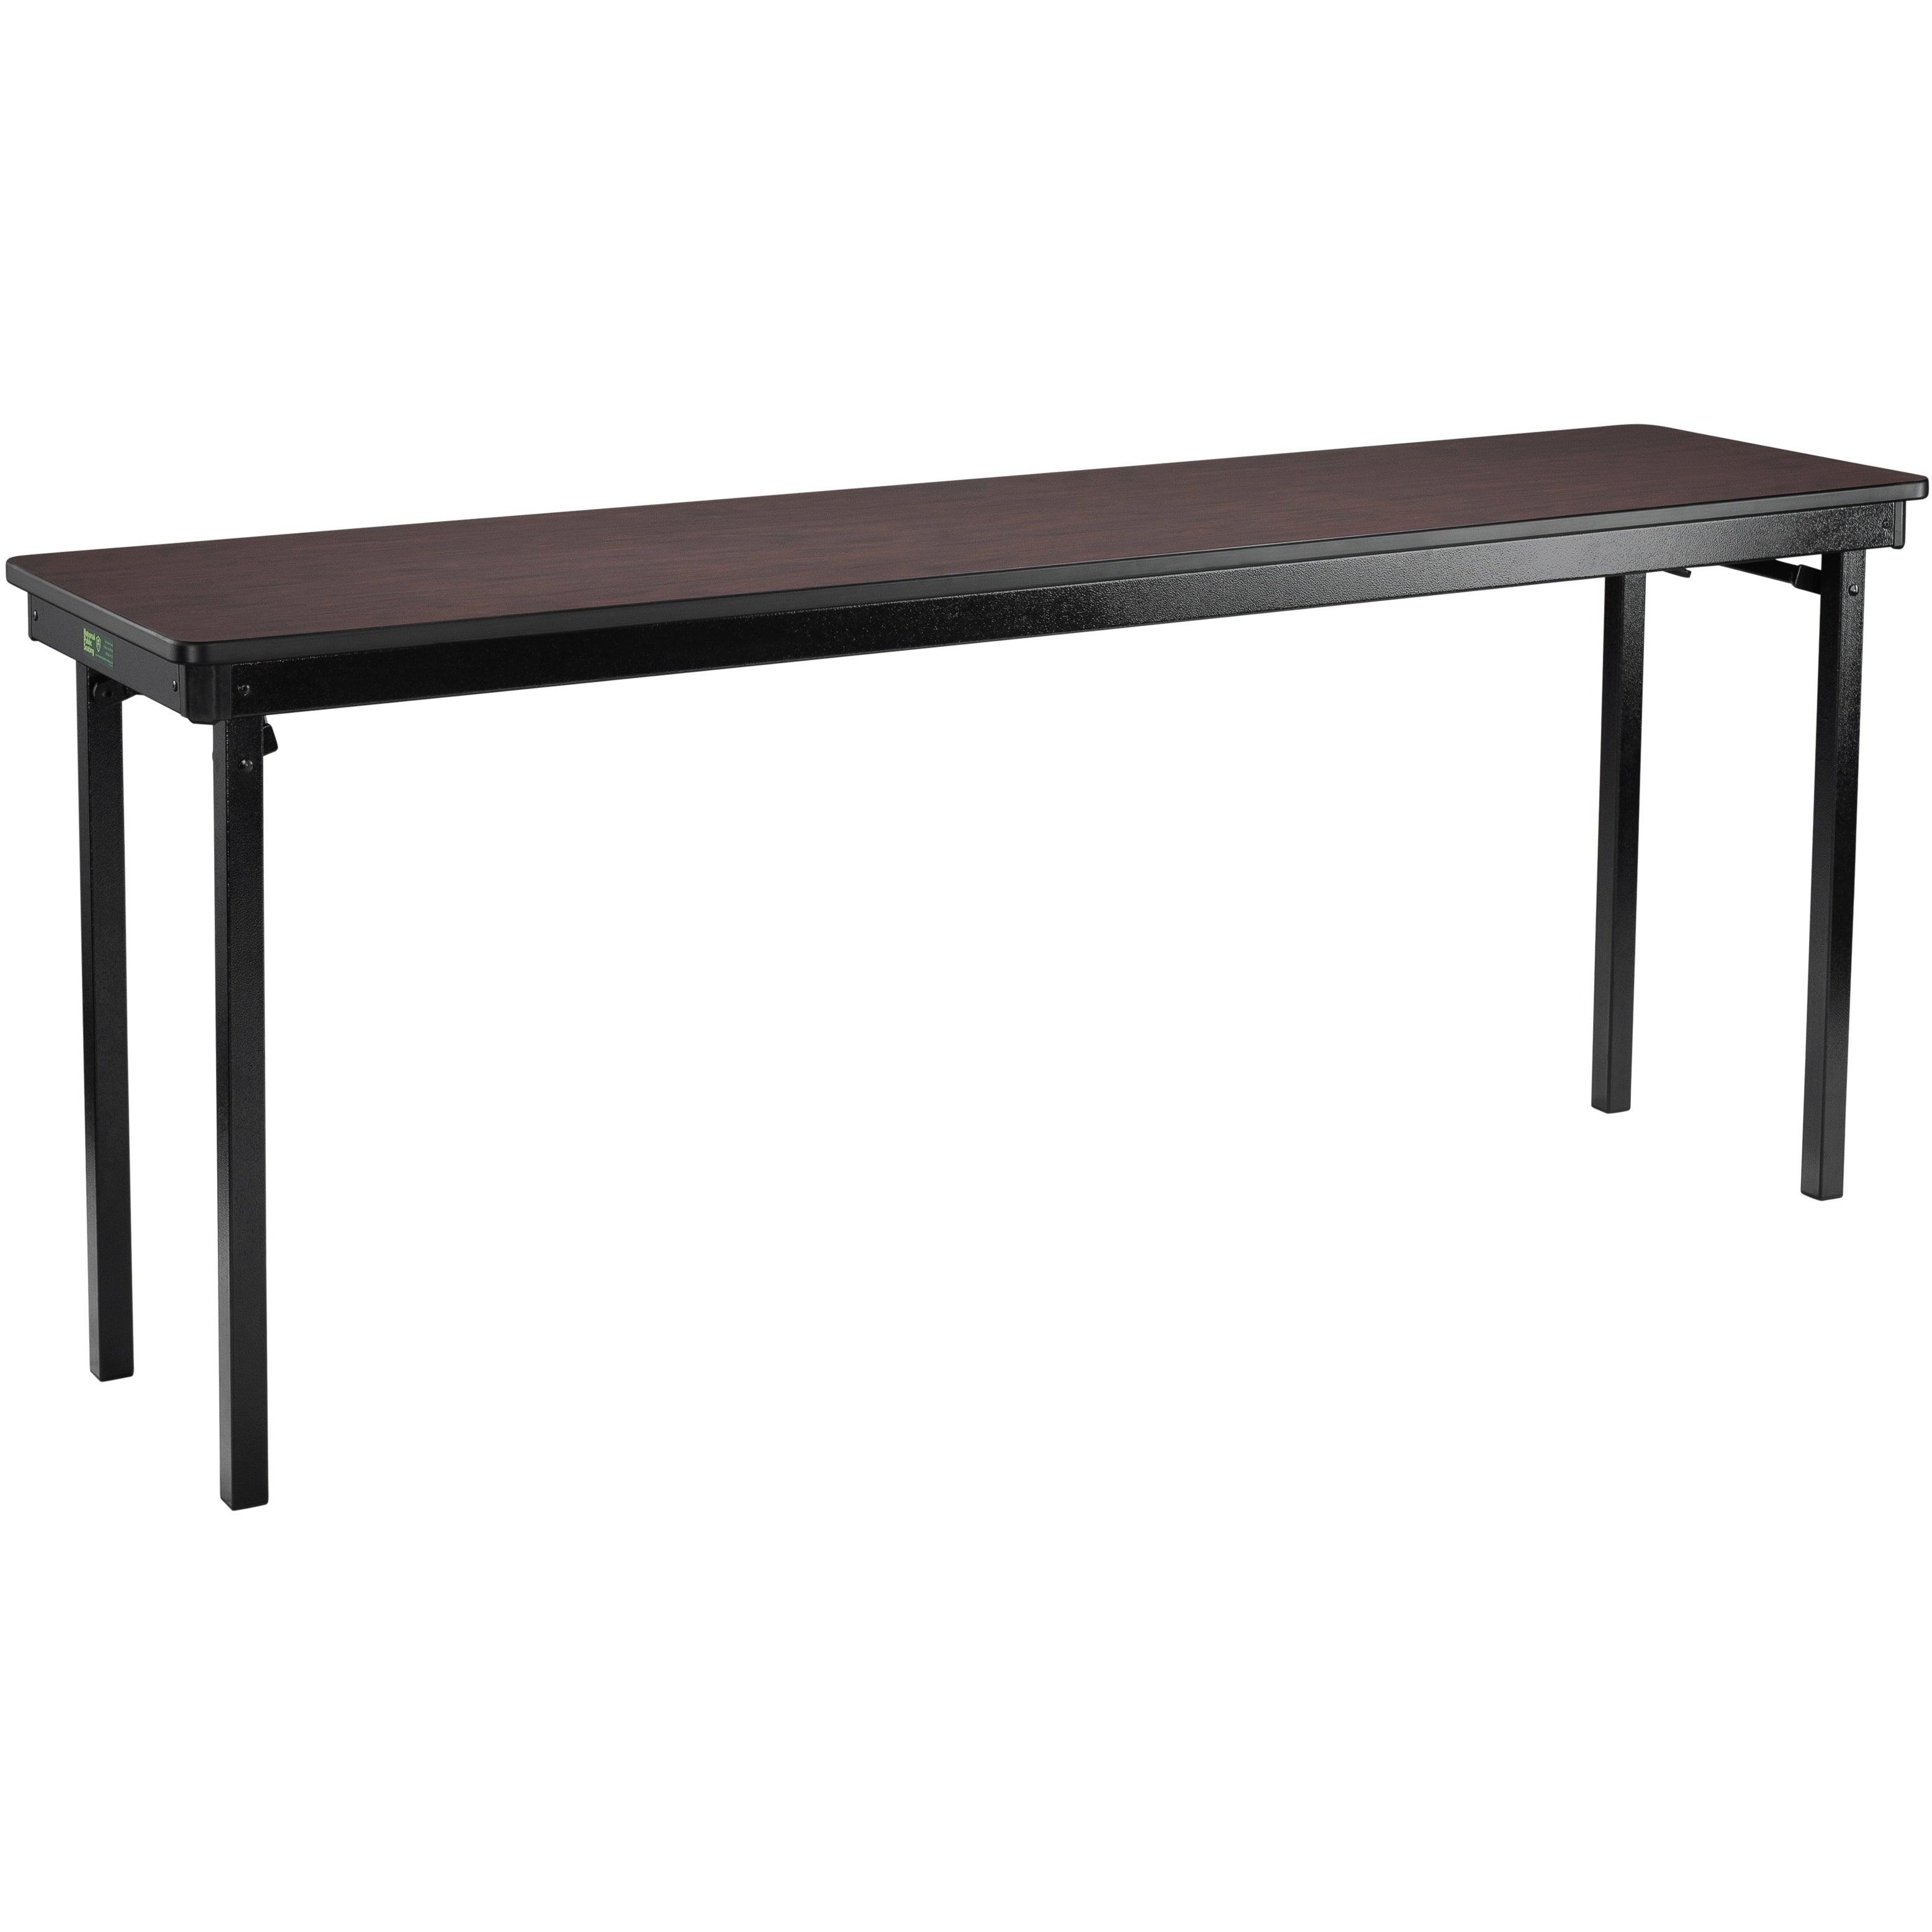 24" x 72" Max Seating Folding Table, MDF Core/ProtcectEdge Banding